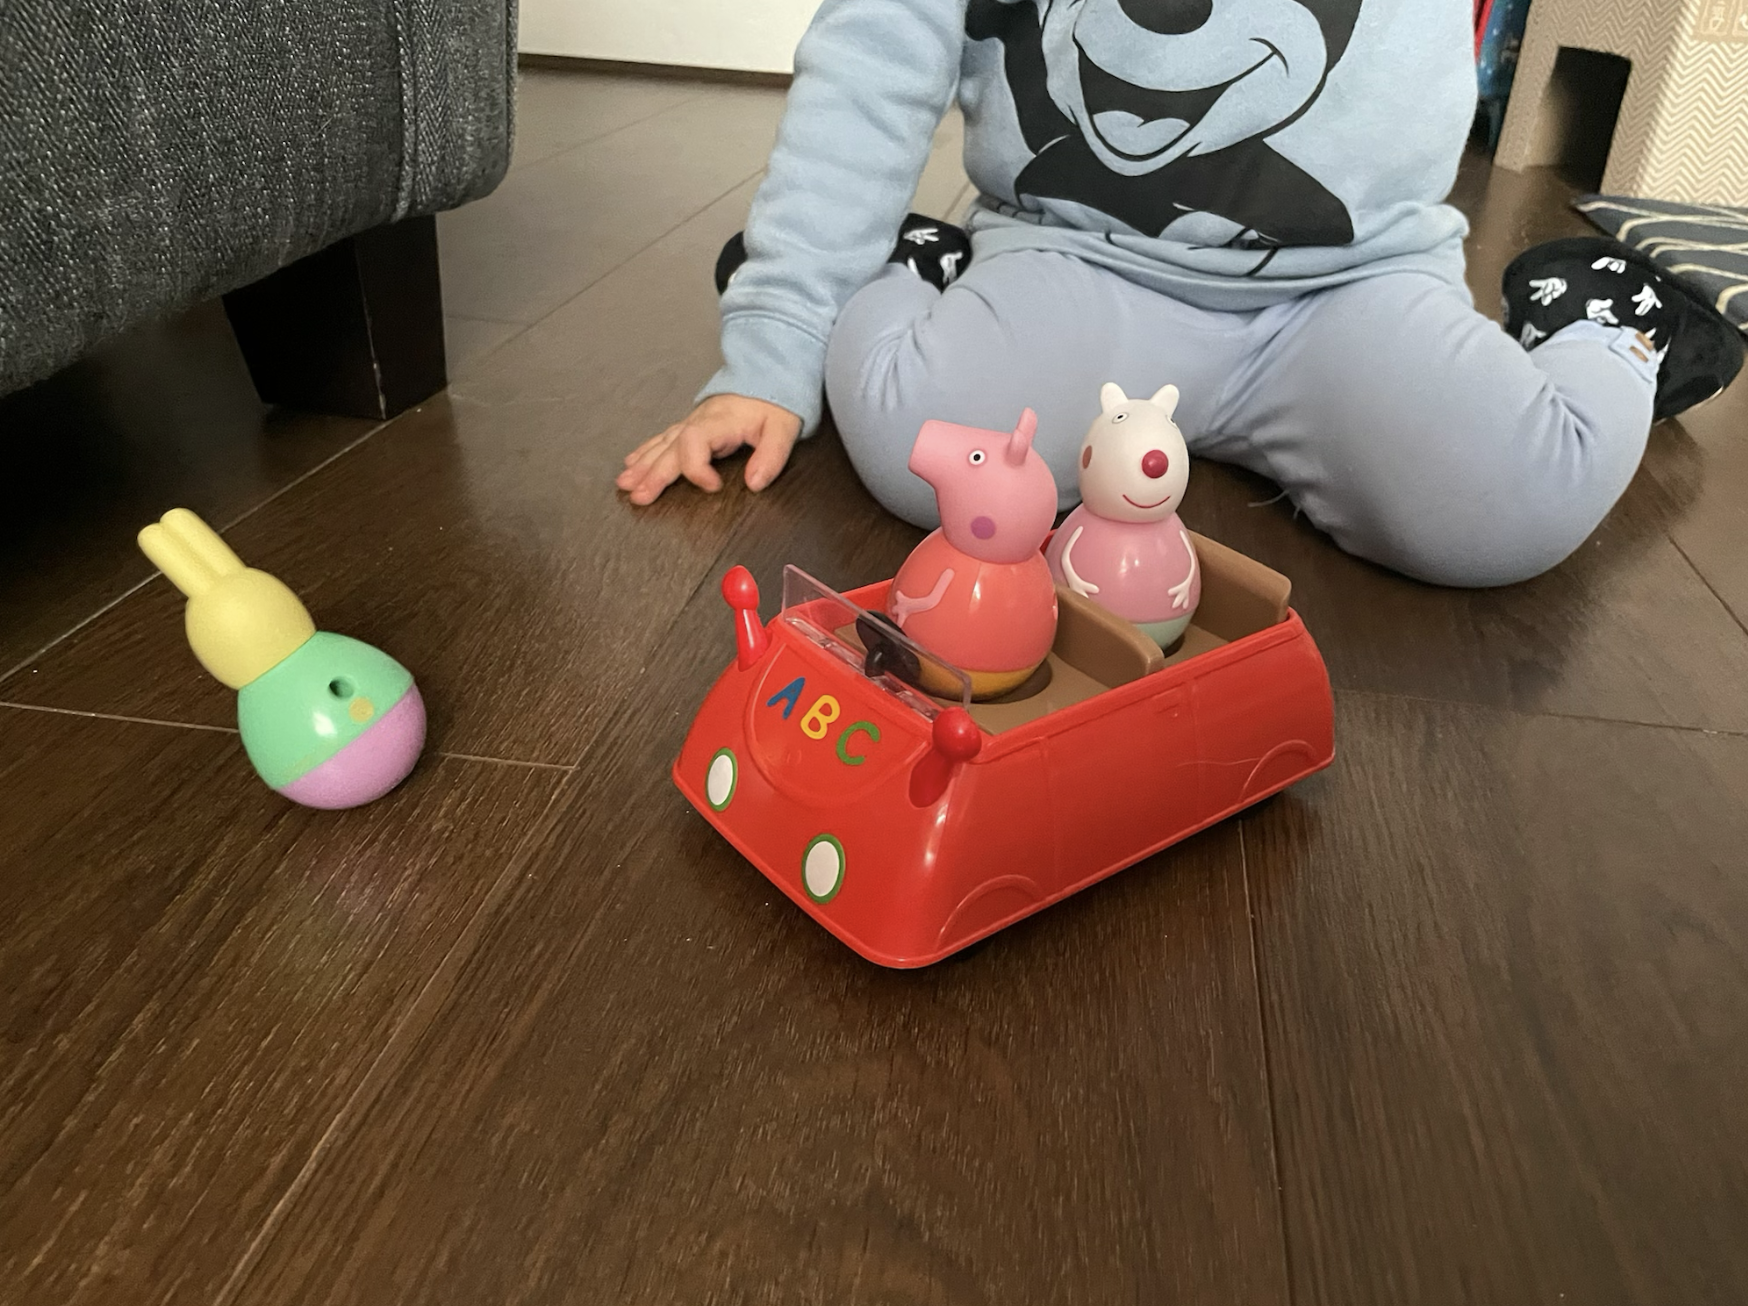 Peppa Pig Weebles, Peppa Pig and Susie Sheep are sat in a red car while Rebecca Rabbit wobbles on a brown wooden floor. A toddlers blue leggings and jumper are in shot playing